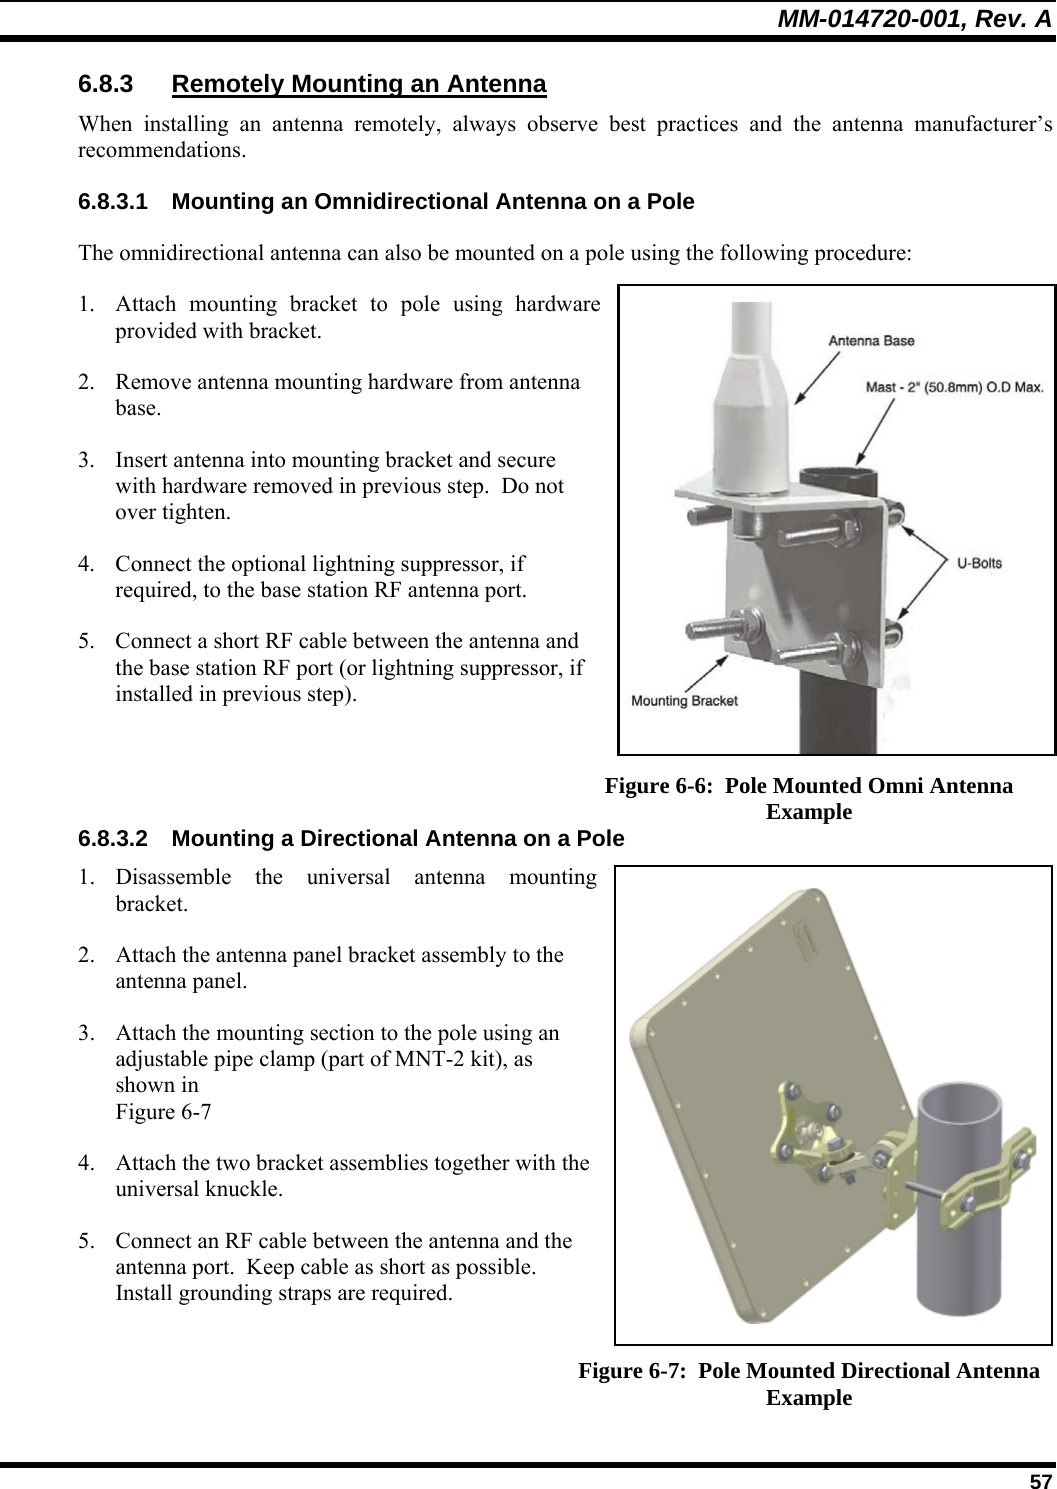 MM-014720-001, Rev. A  57 6.8.3 Remotely Mounting an Antenna When installing an antenna remotely, always observe best practices and the antenna manufacturer’s recommendations. 6.8.3.1  Mounting an Omnidirectional Antenna on a Pole The omnidirectional antenna can also be mounted on a pole using the following procedure: 1. Attach mounting bracket to pole using hardware provided with bracket. 2. Remove antenna mounting hardware from antenna base. 3. Insert antenna into mounting bracket and secure with hardware removed in previous step.  Do not over tighten. 4. Connect the optional lightning suppressor, if required, to the base station RF antenna port. 5. Connect a short RF cable between the antenna and the base station RF port (or lightning suppressor, if installed in previous step).    Figure 6-6:  Pole Mounted Omni Antenna Example 6.8.3.2  Mounting a Directional Antenna on a Pole 1. Disassemble the universal antenna mounting bracket. 2. Attach the antenna panel bracket assembly to the antenna panel. 3. Attach the mounting section to the pole using an adjustable pipe clamp (part of MNT-2 kit), as shown in  Figure 6-7 4. Attach the two bracket assemblies together with the universal knuckle. 5. Connect an RF cable between the antenna and the antenna port.  Keep cable as short as possible.  Install grounding straps are required.  Figure 6-7:  Pole Mounted Directional Antenna Example 